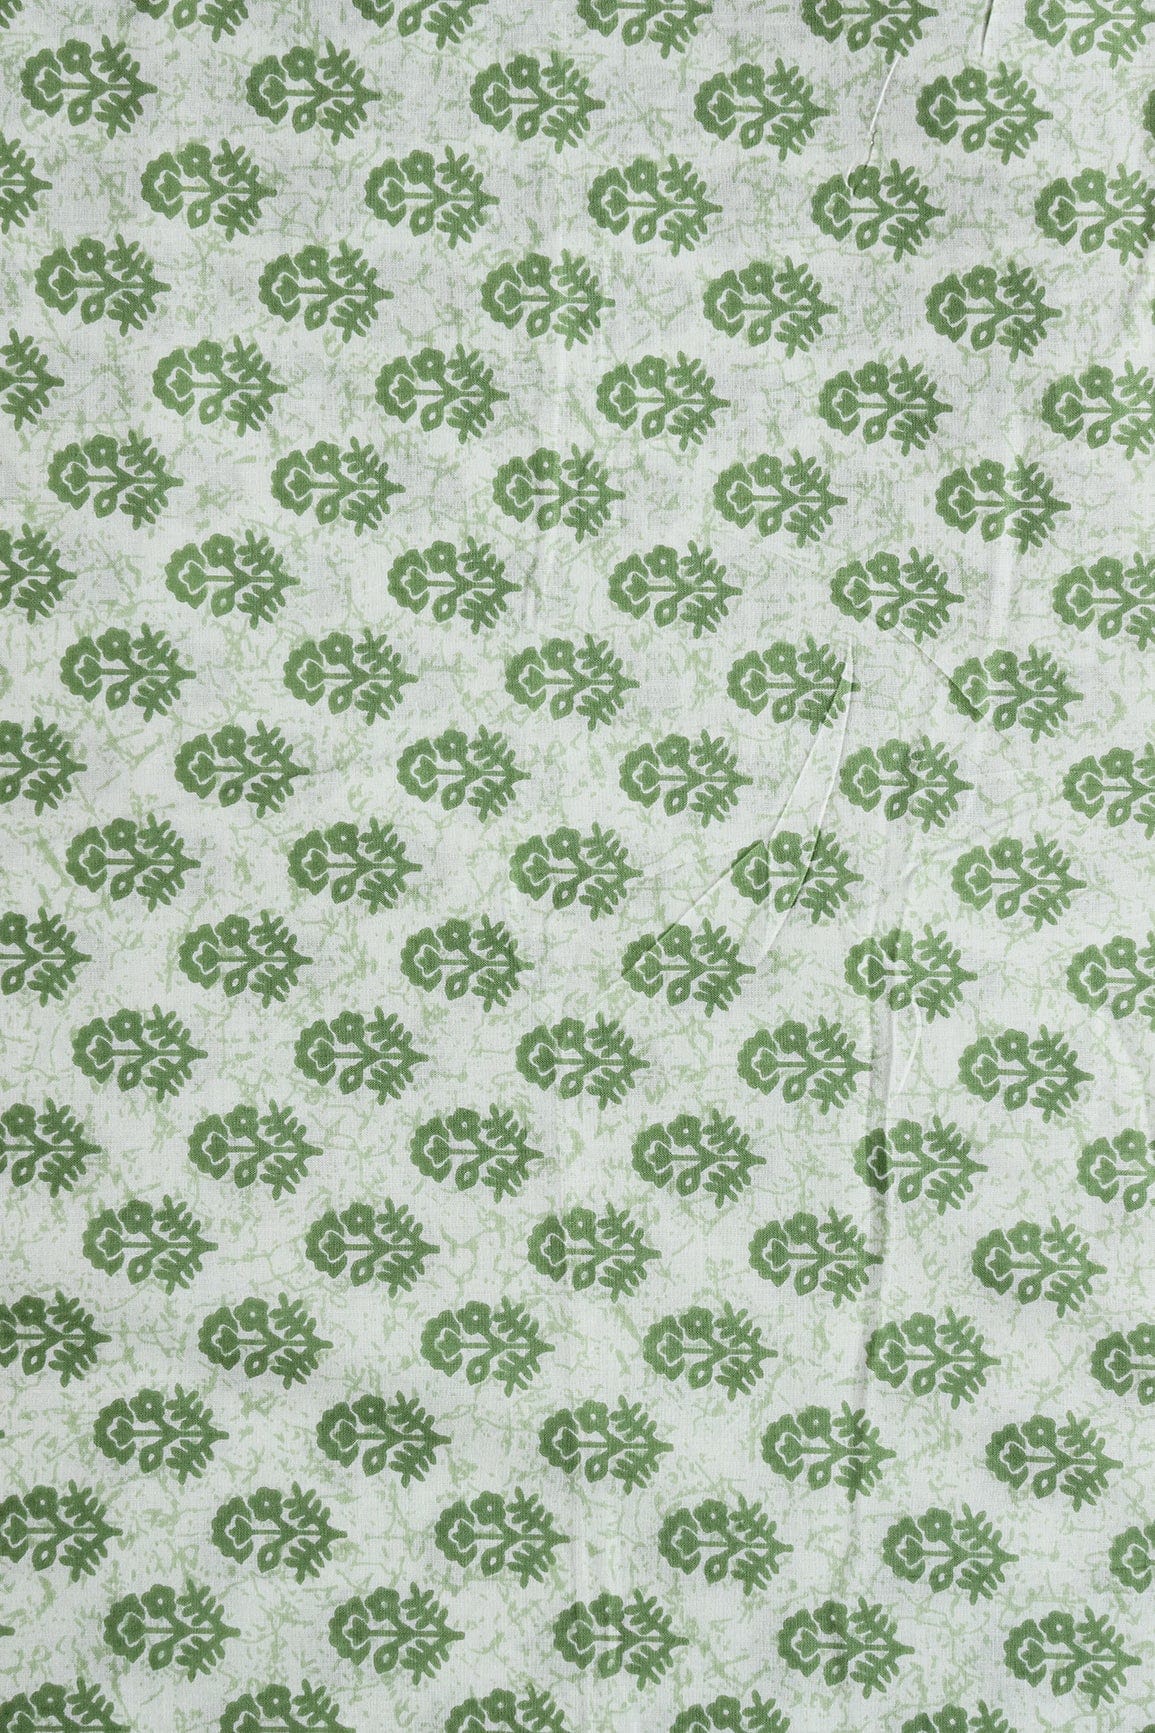 doeraa Prints White And Green Floral Print On Pure Mul Cotton Fabric